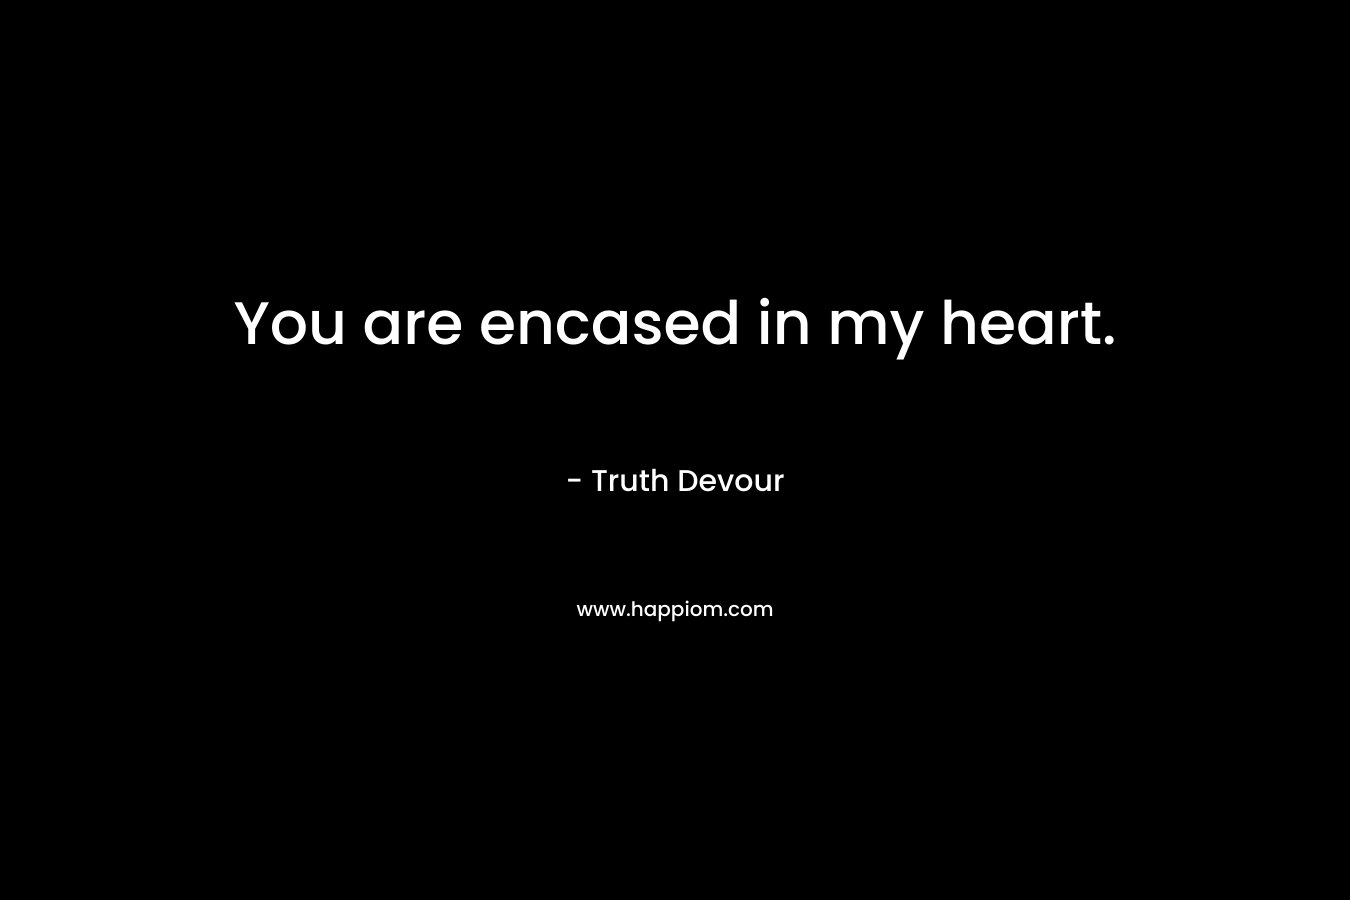 You are encased in my heart.